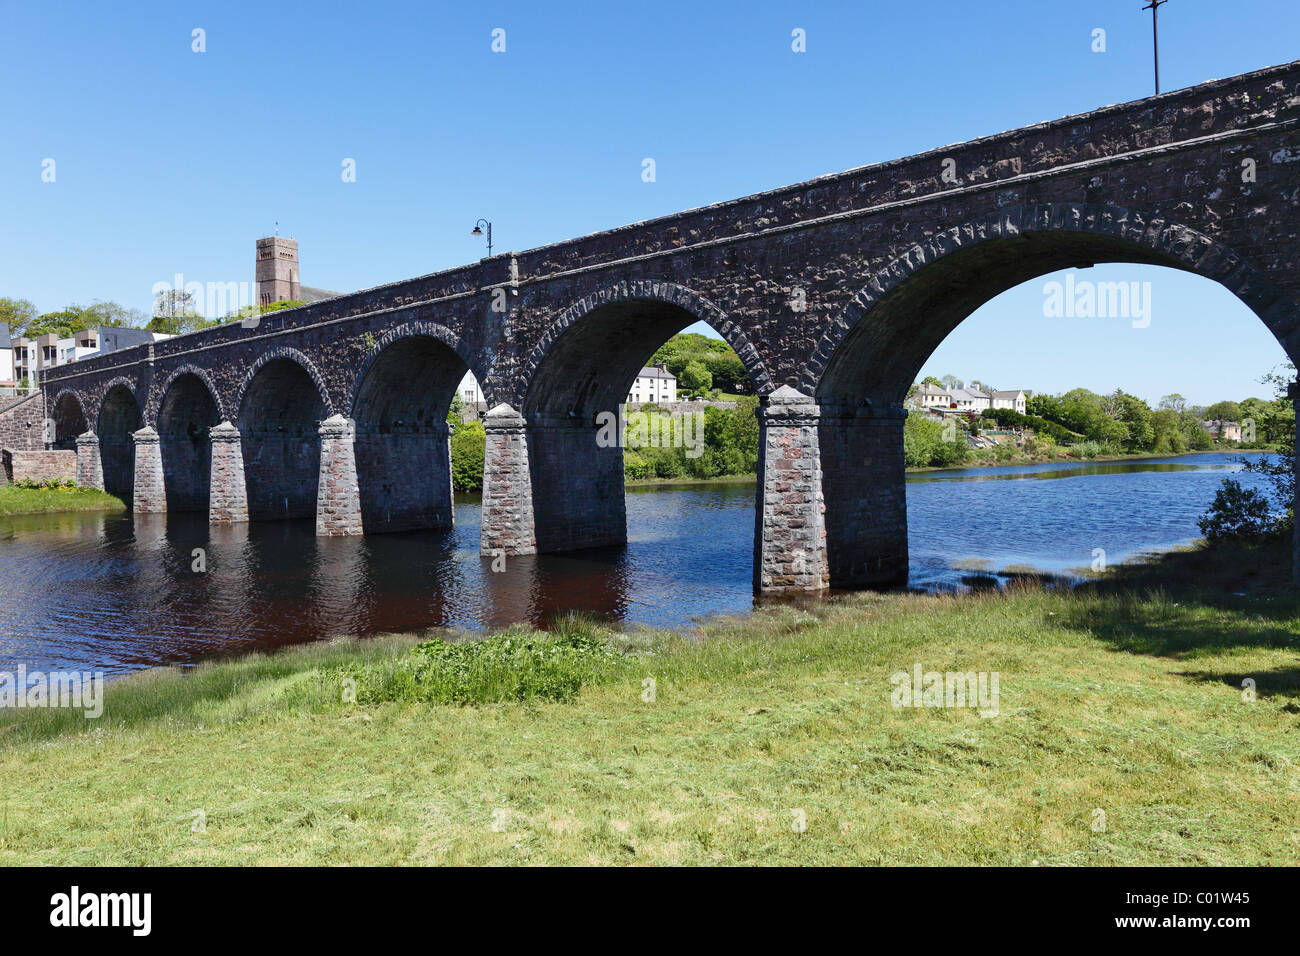 Viaduct across the Newport River built in 1892, Newport, County Mayo, Connacht province, Republic of Ireland, Europe Stock Photo